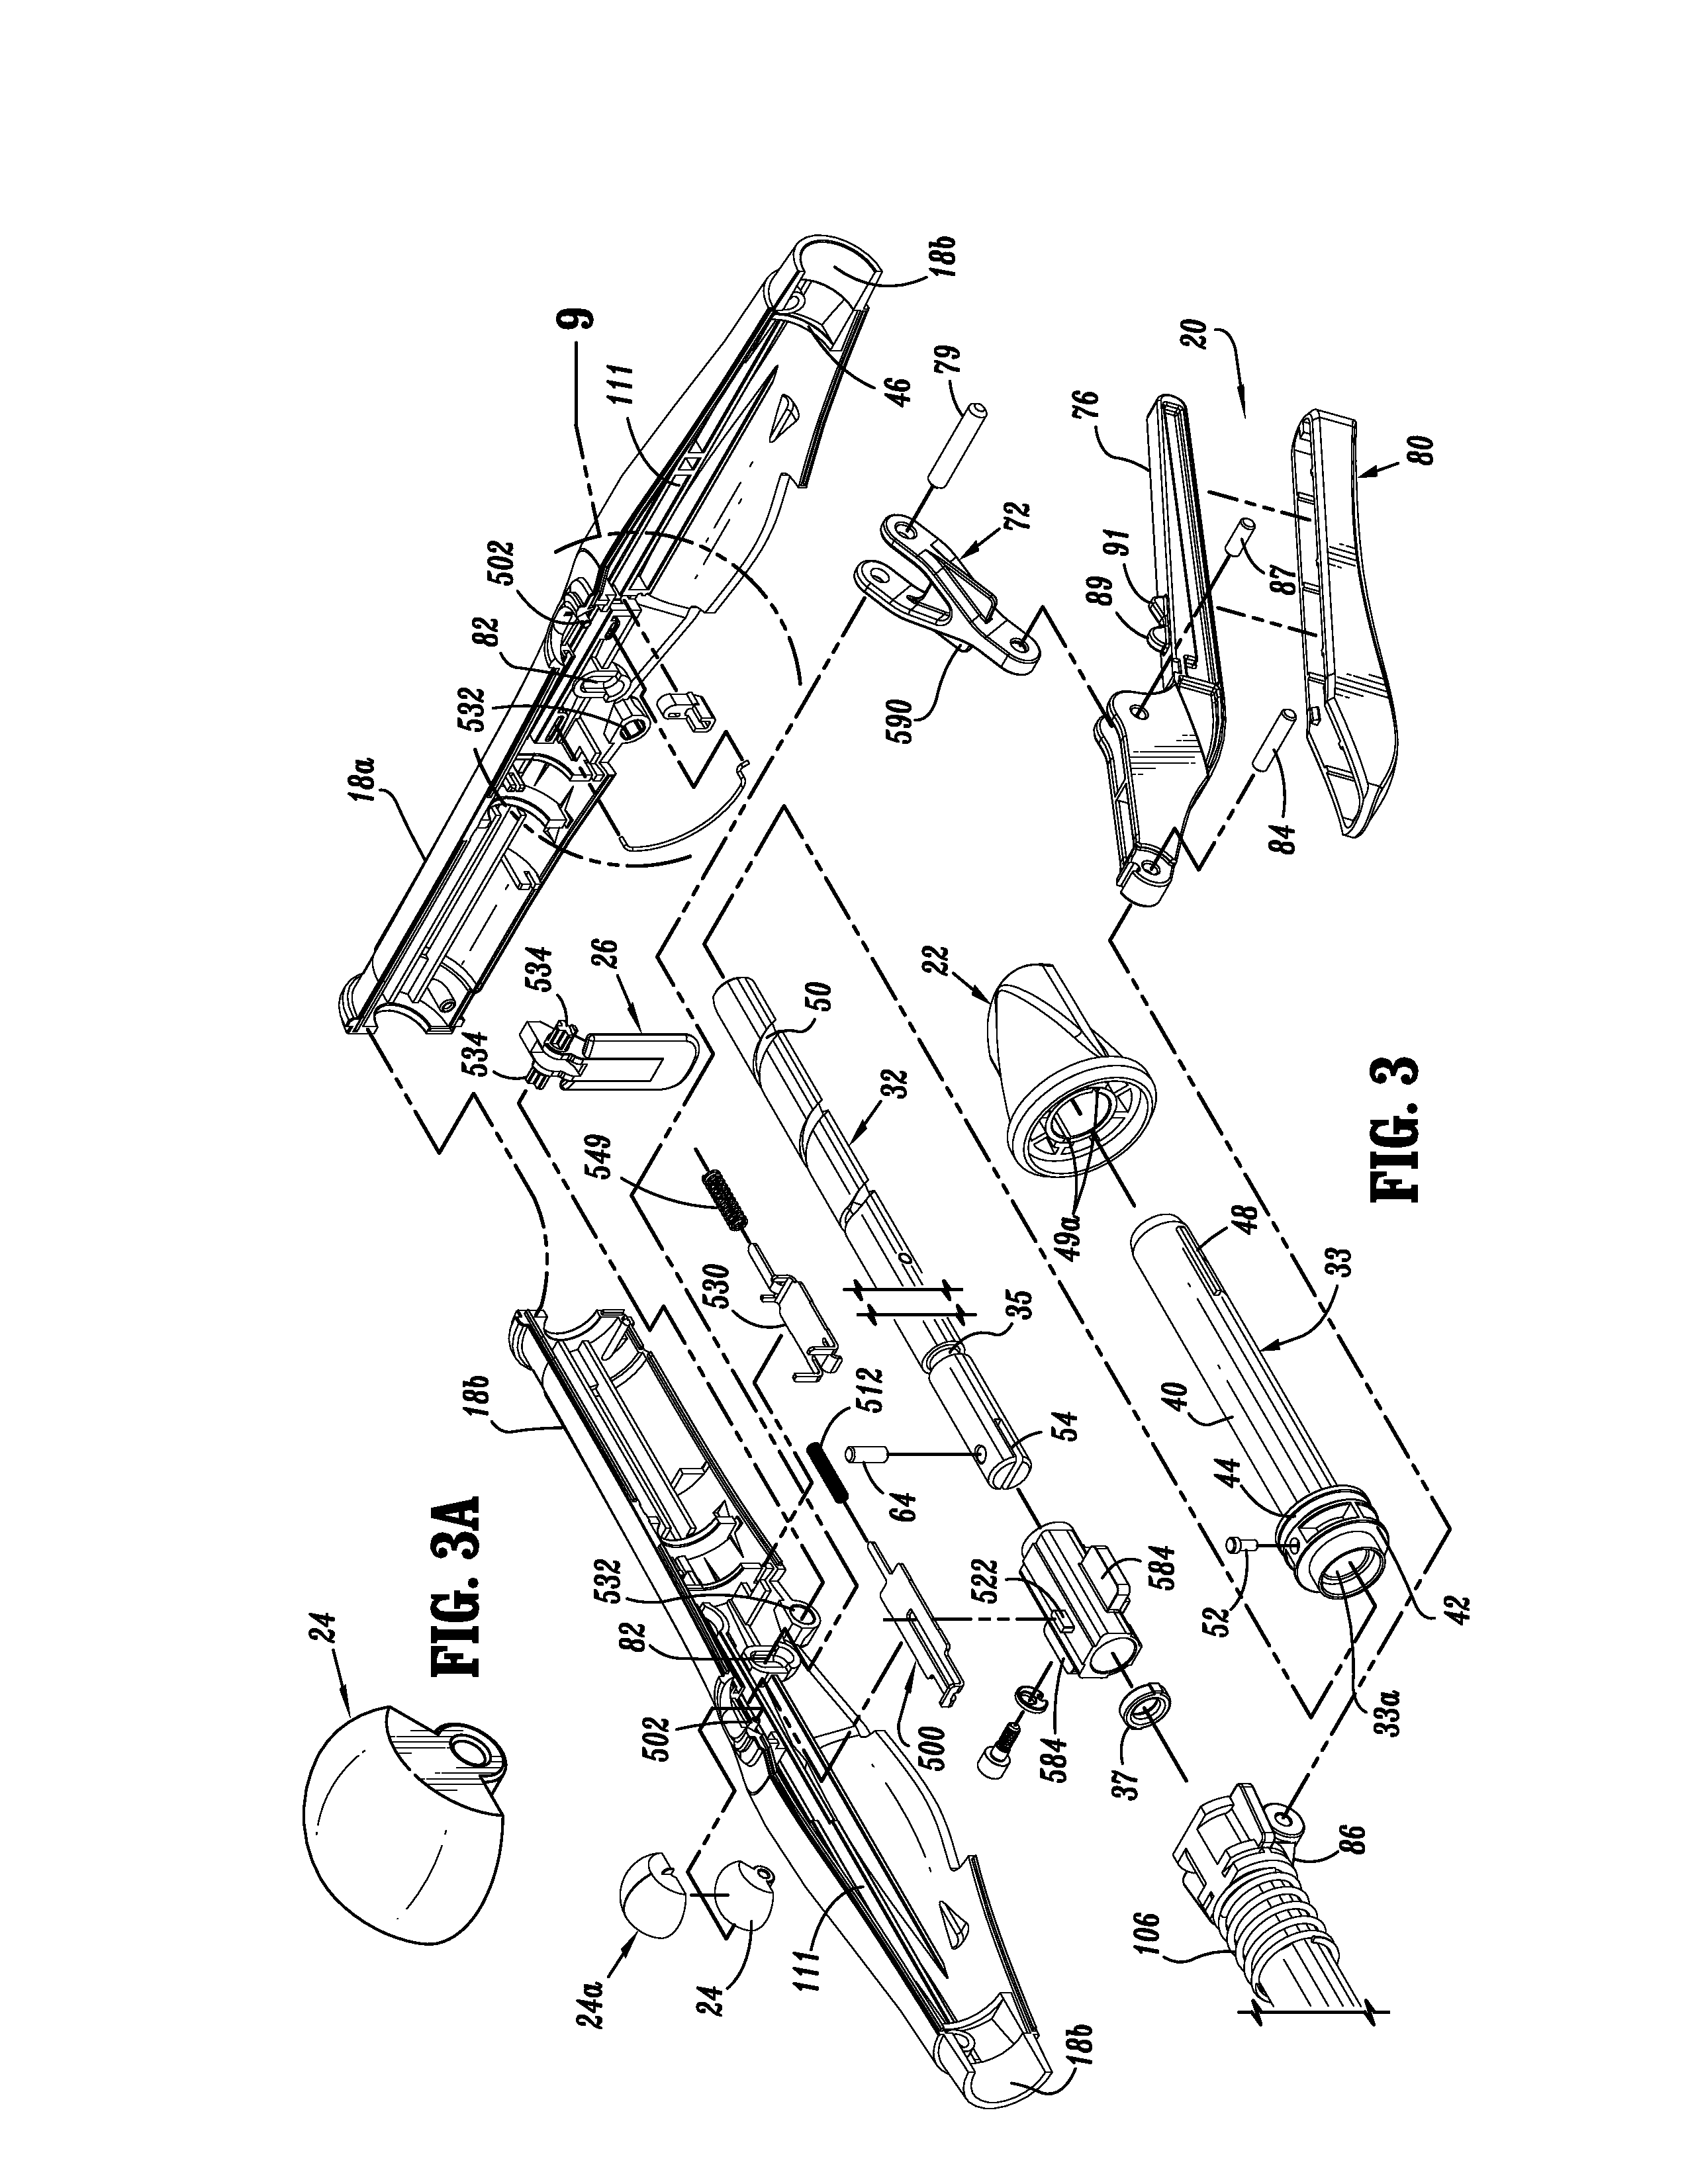 Method and device for performing a surgical anastomosis